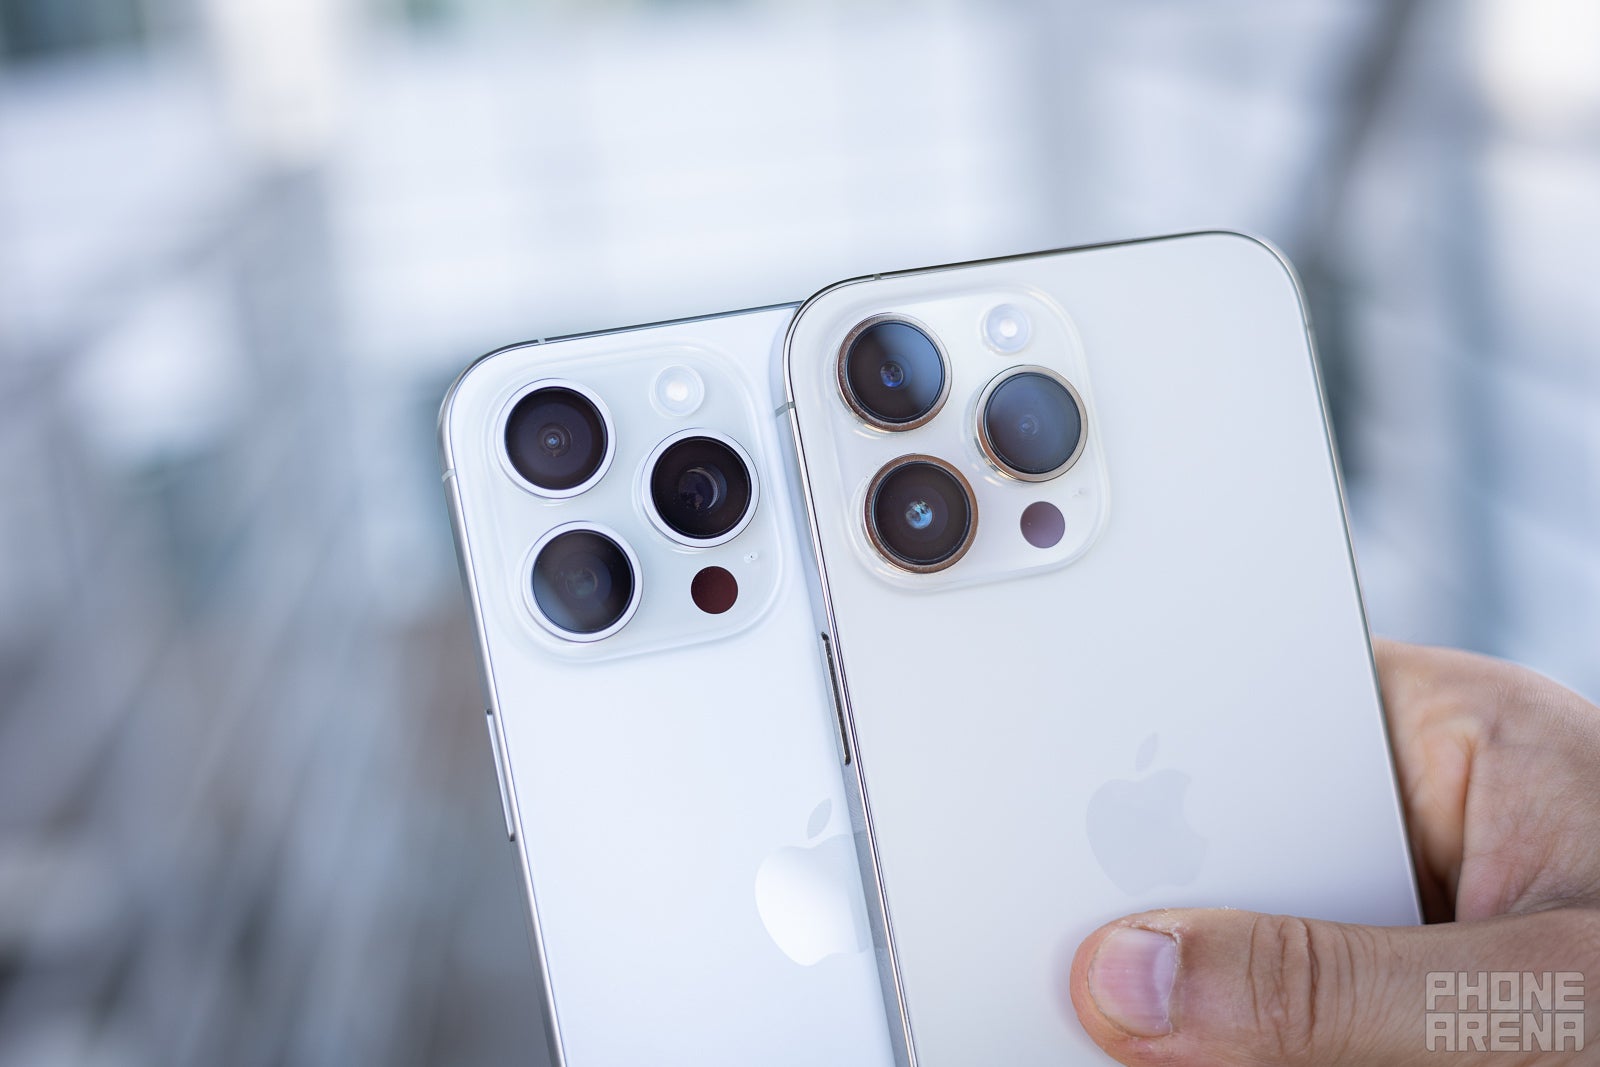 iPhone 15 Pro Max vs iPhone 14 Pro Max (Image credit - PhoneArena) - Apple iPhone 15 Pro Max vs iPhone 14 Pro Max: main differences